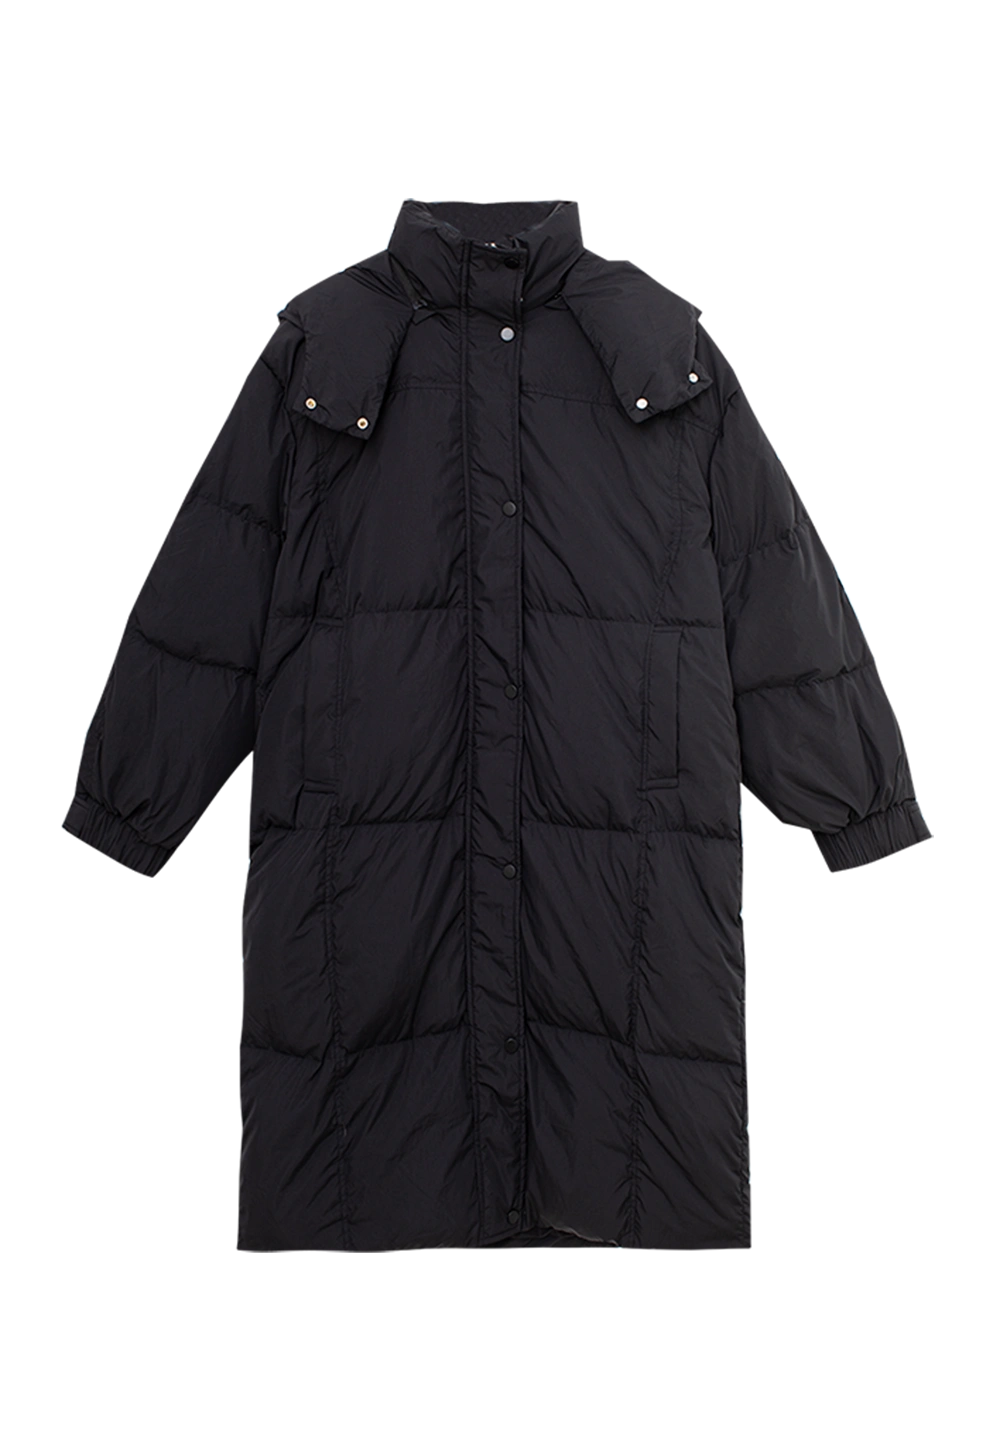 Women's Long Puffer Coat with Hood and Snap Buttons